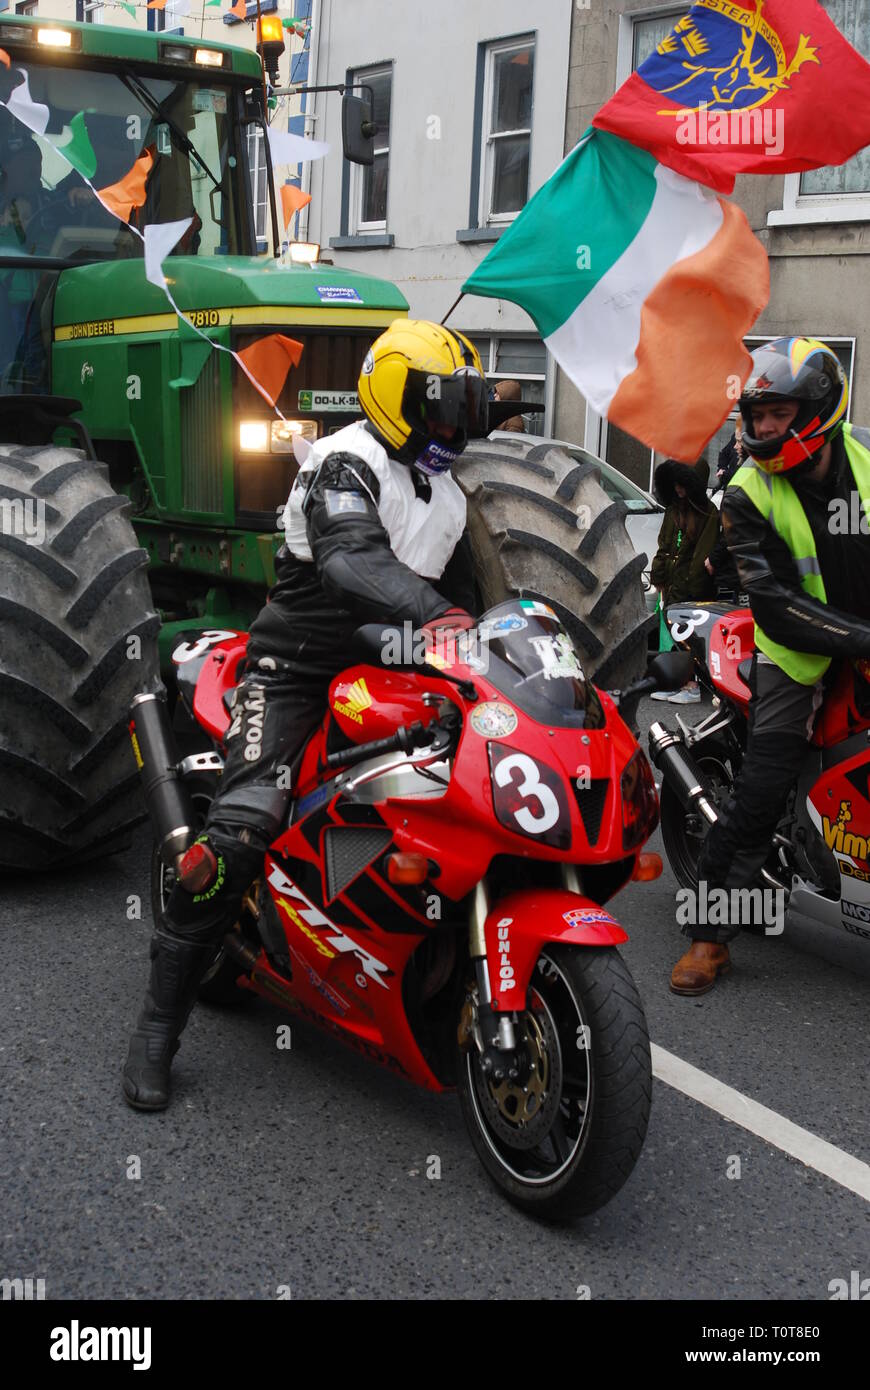 Motorcycle in Parade Rathkeale County Limerick Ireland Stock Photo